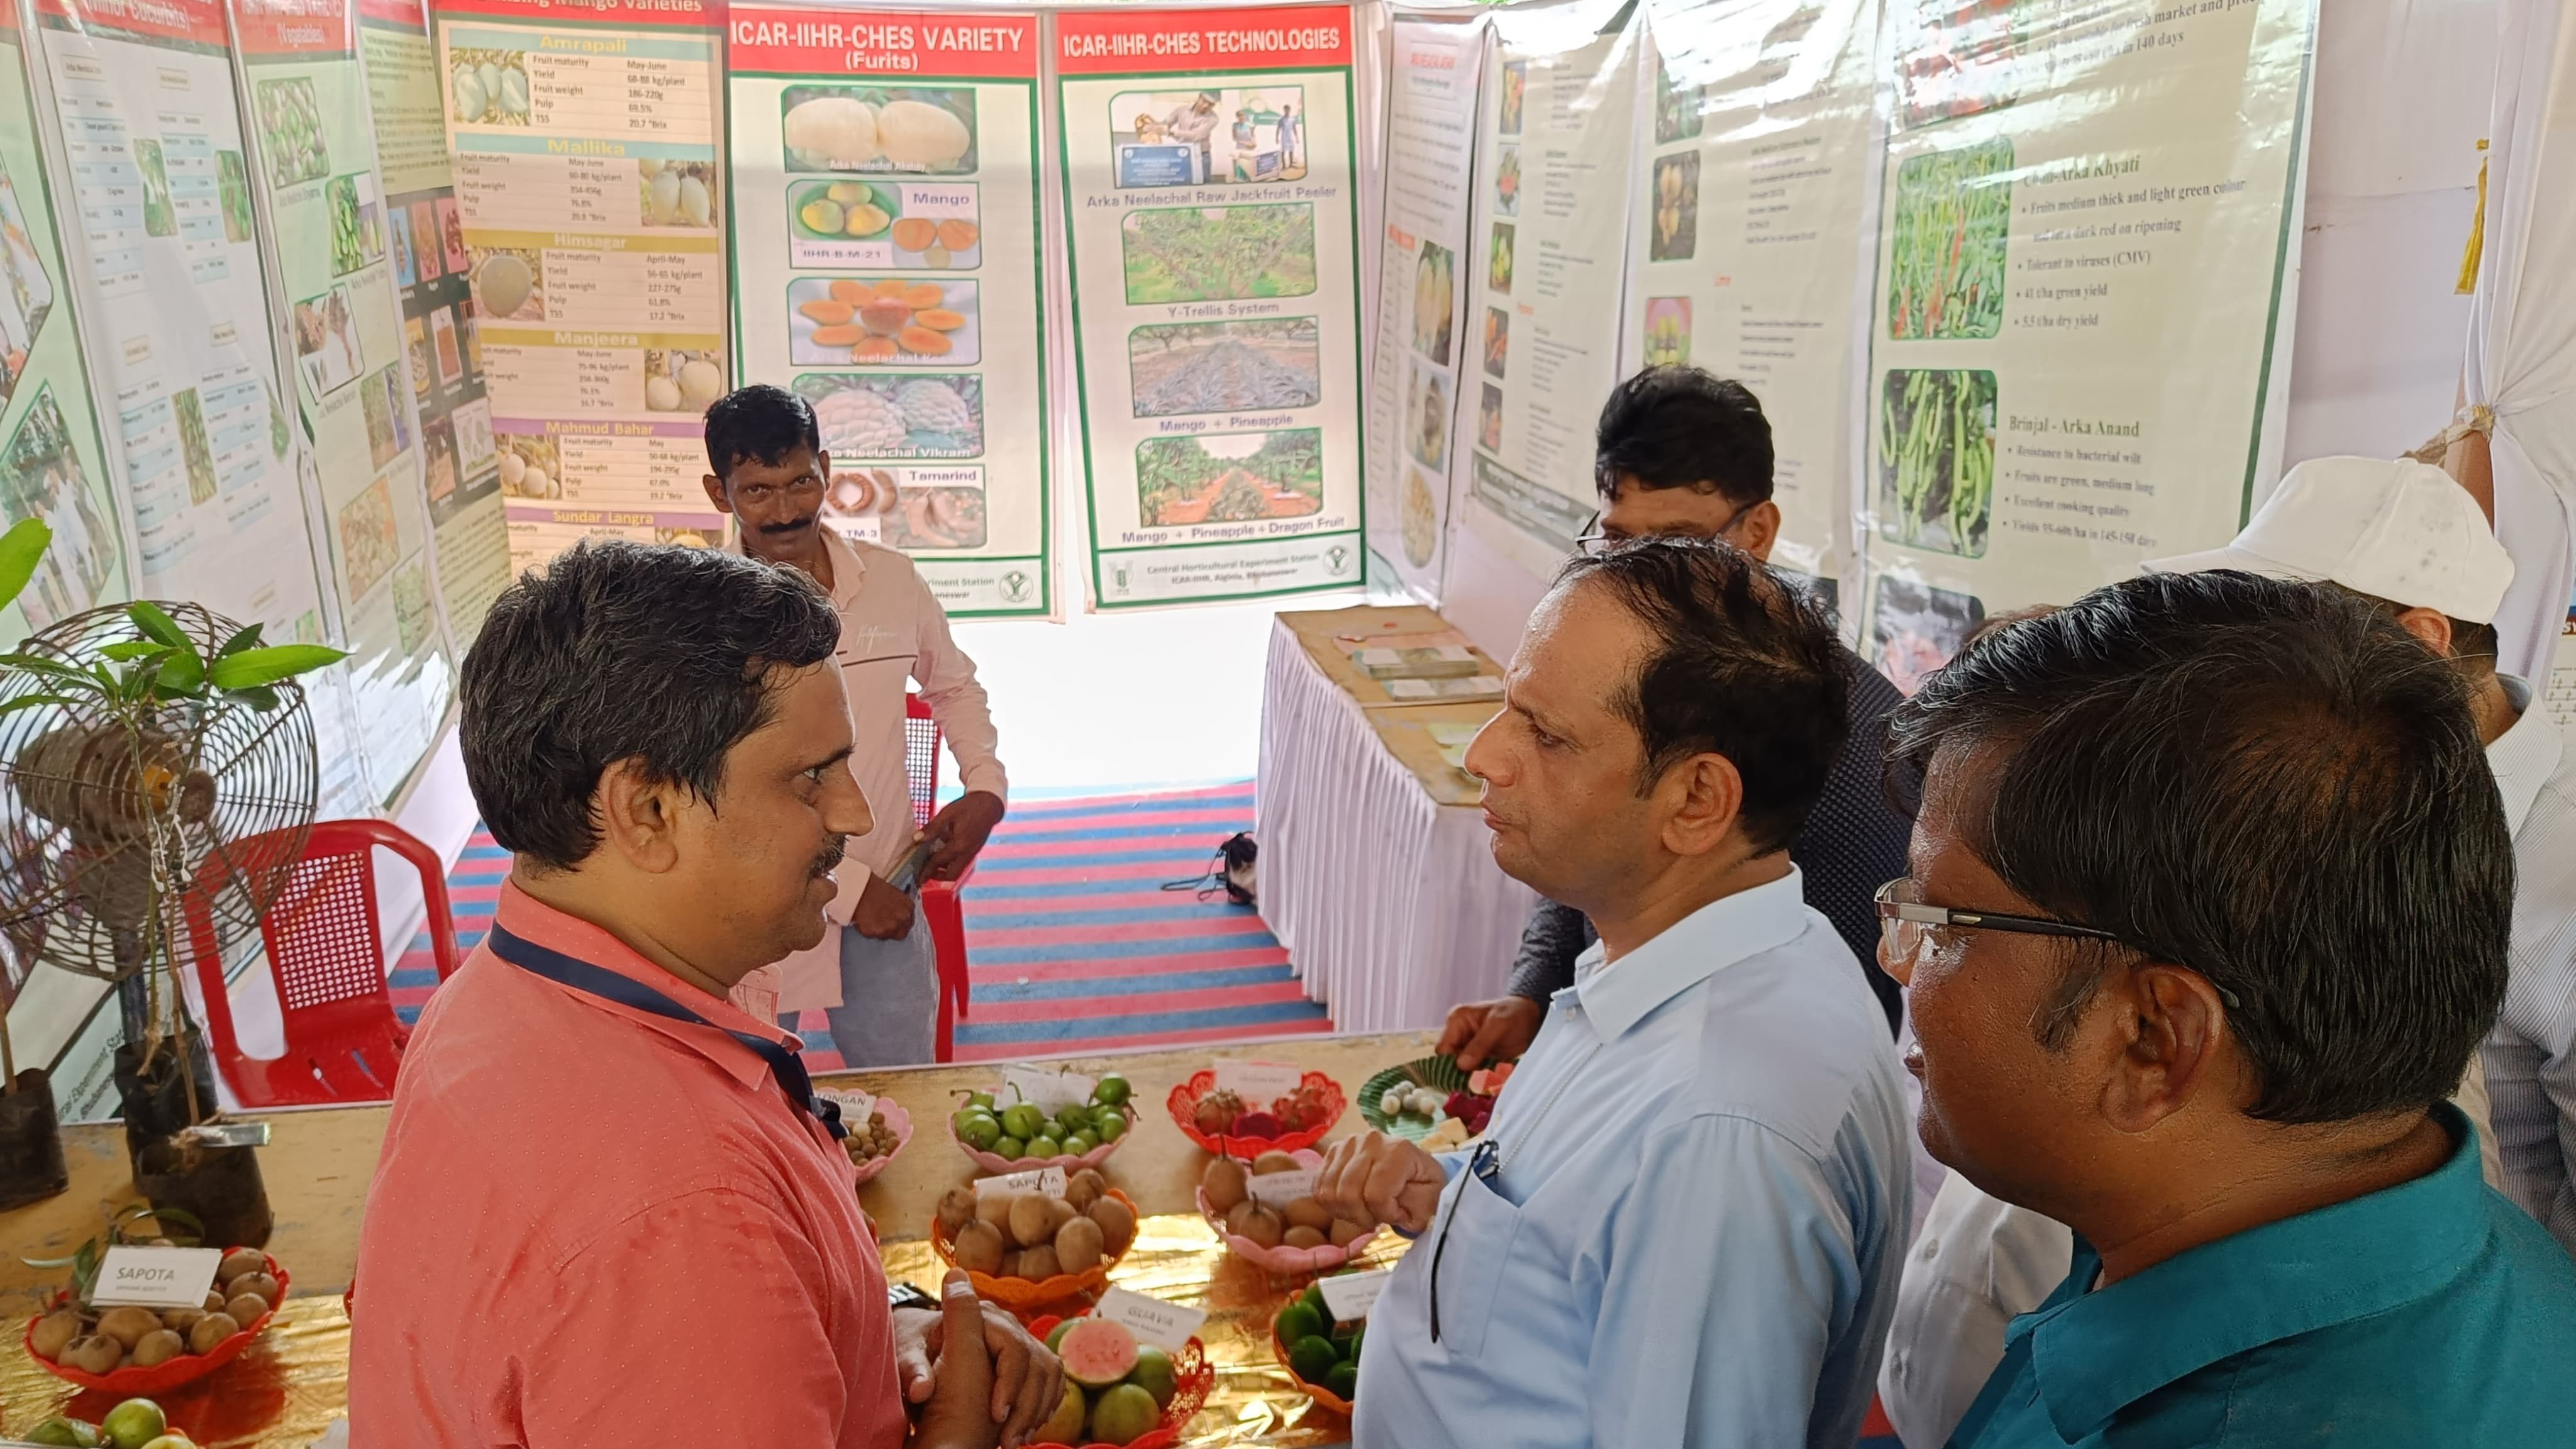 Central Horticultural Experiment Station (CHES), ICAR-IIHR participated in Exhibition at ICAR-Central Institute of Freshwater Aquaculture, Bhubaneswar